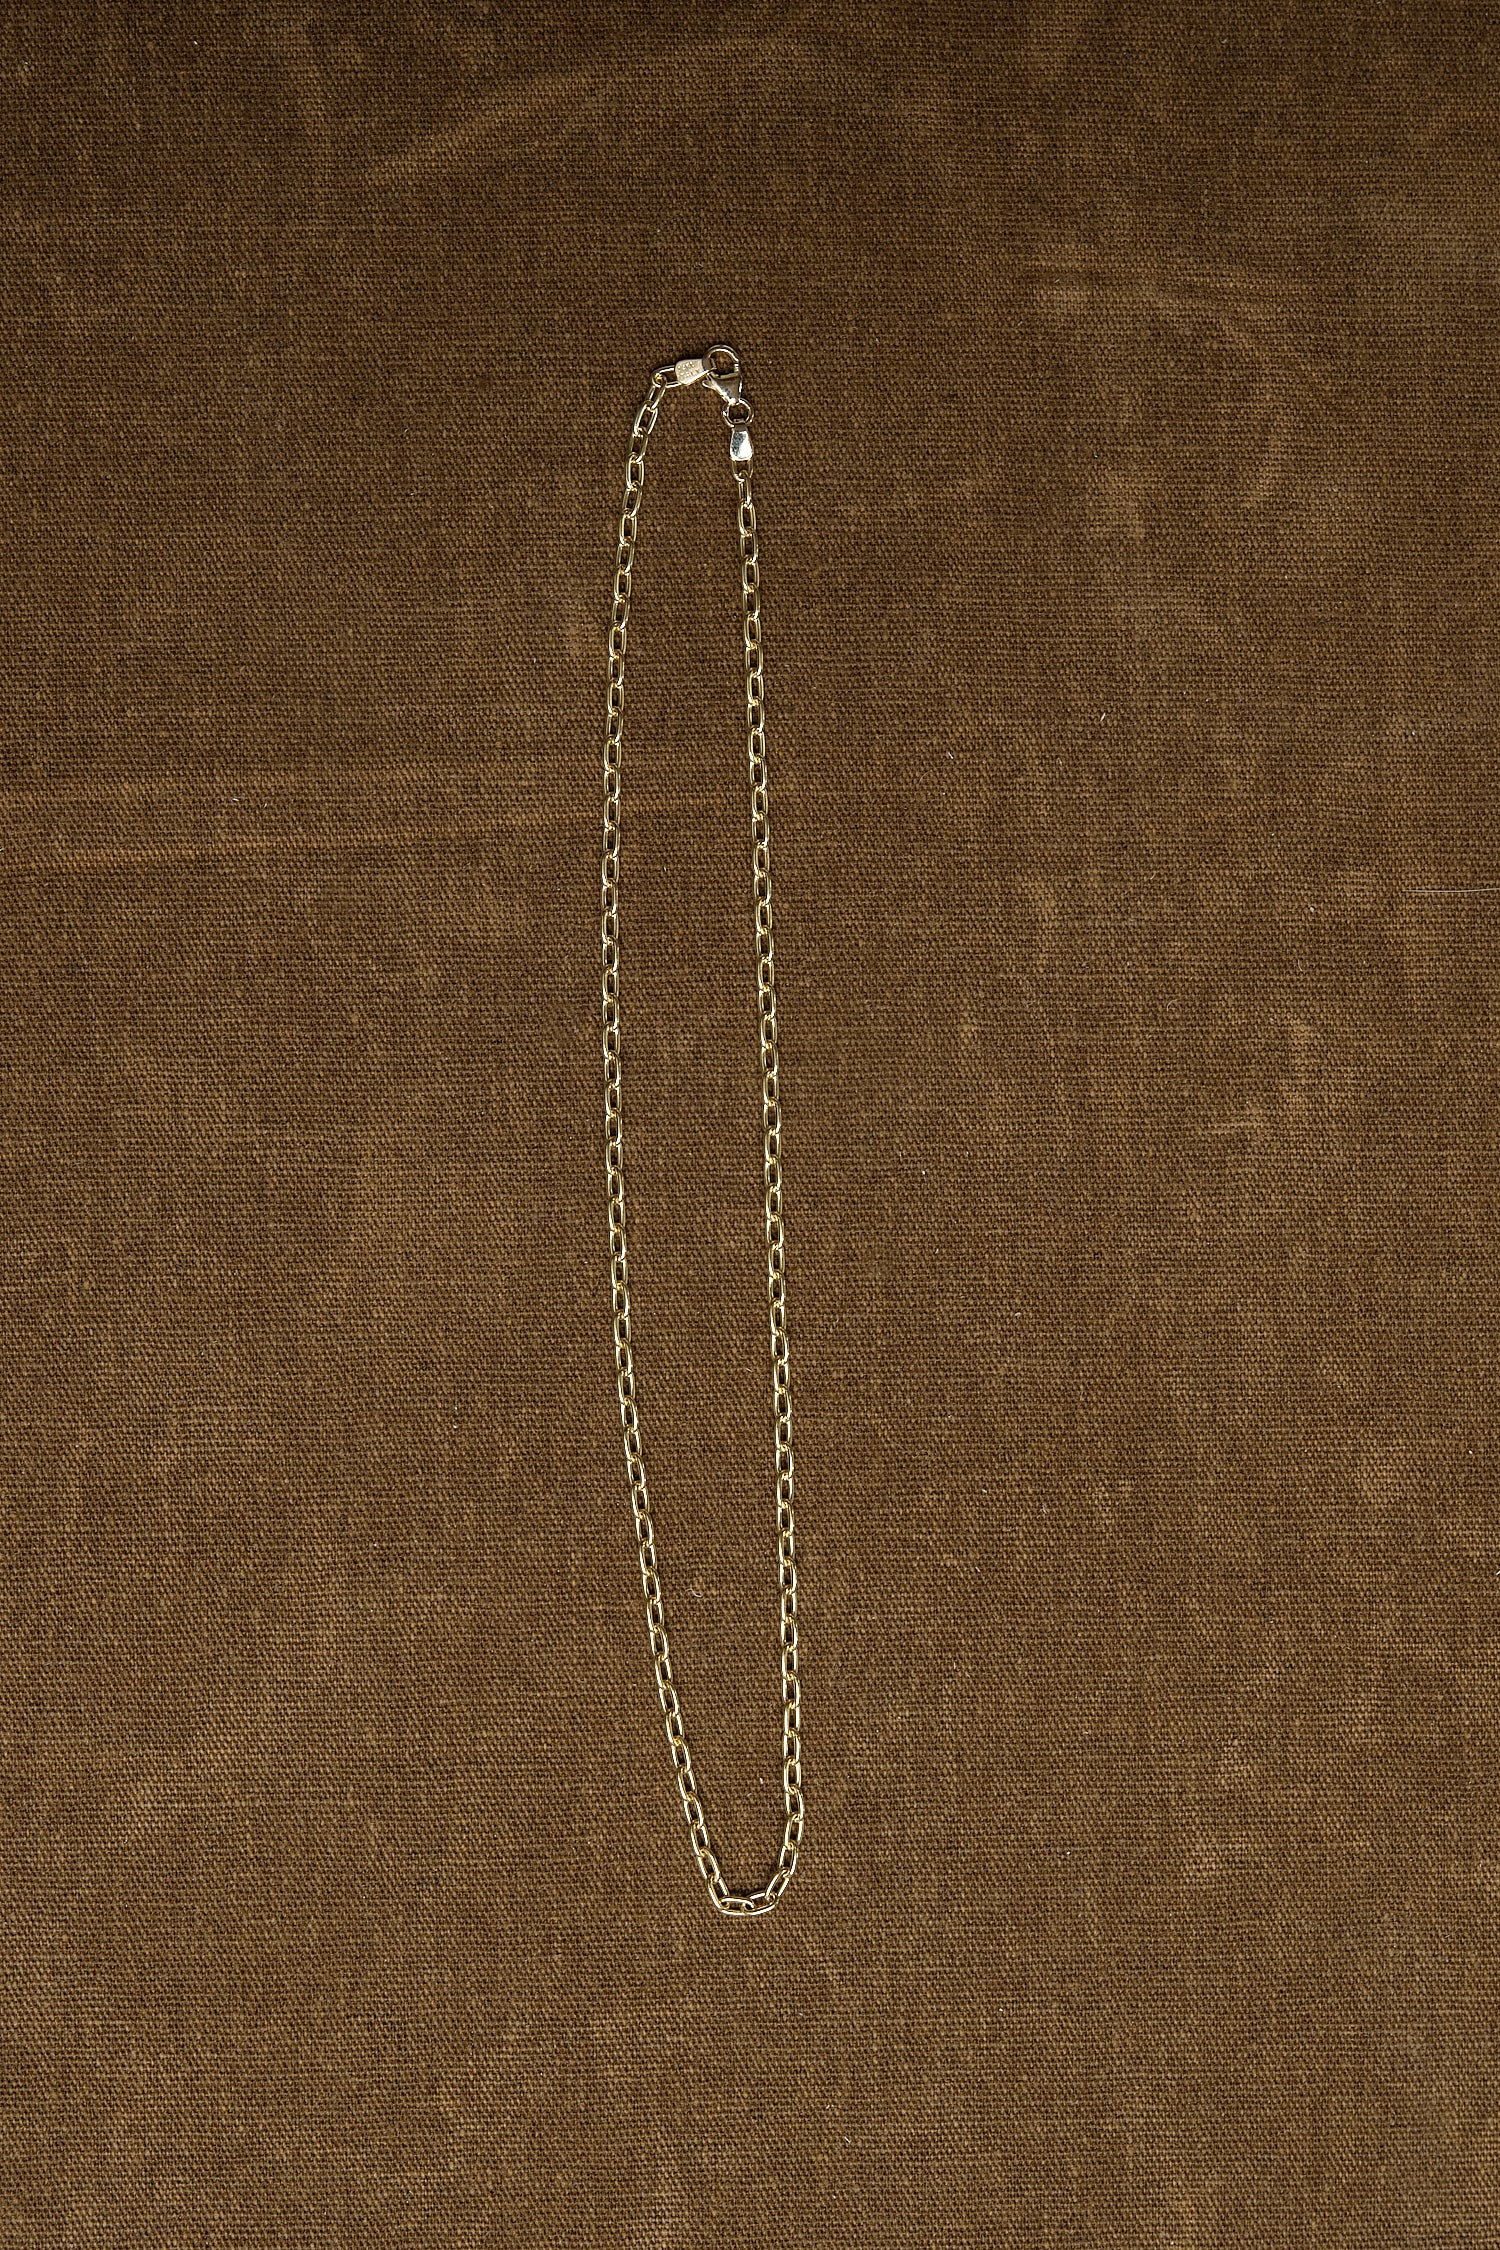 14k yellow gold Oval Link Chain